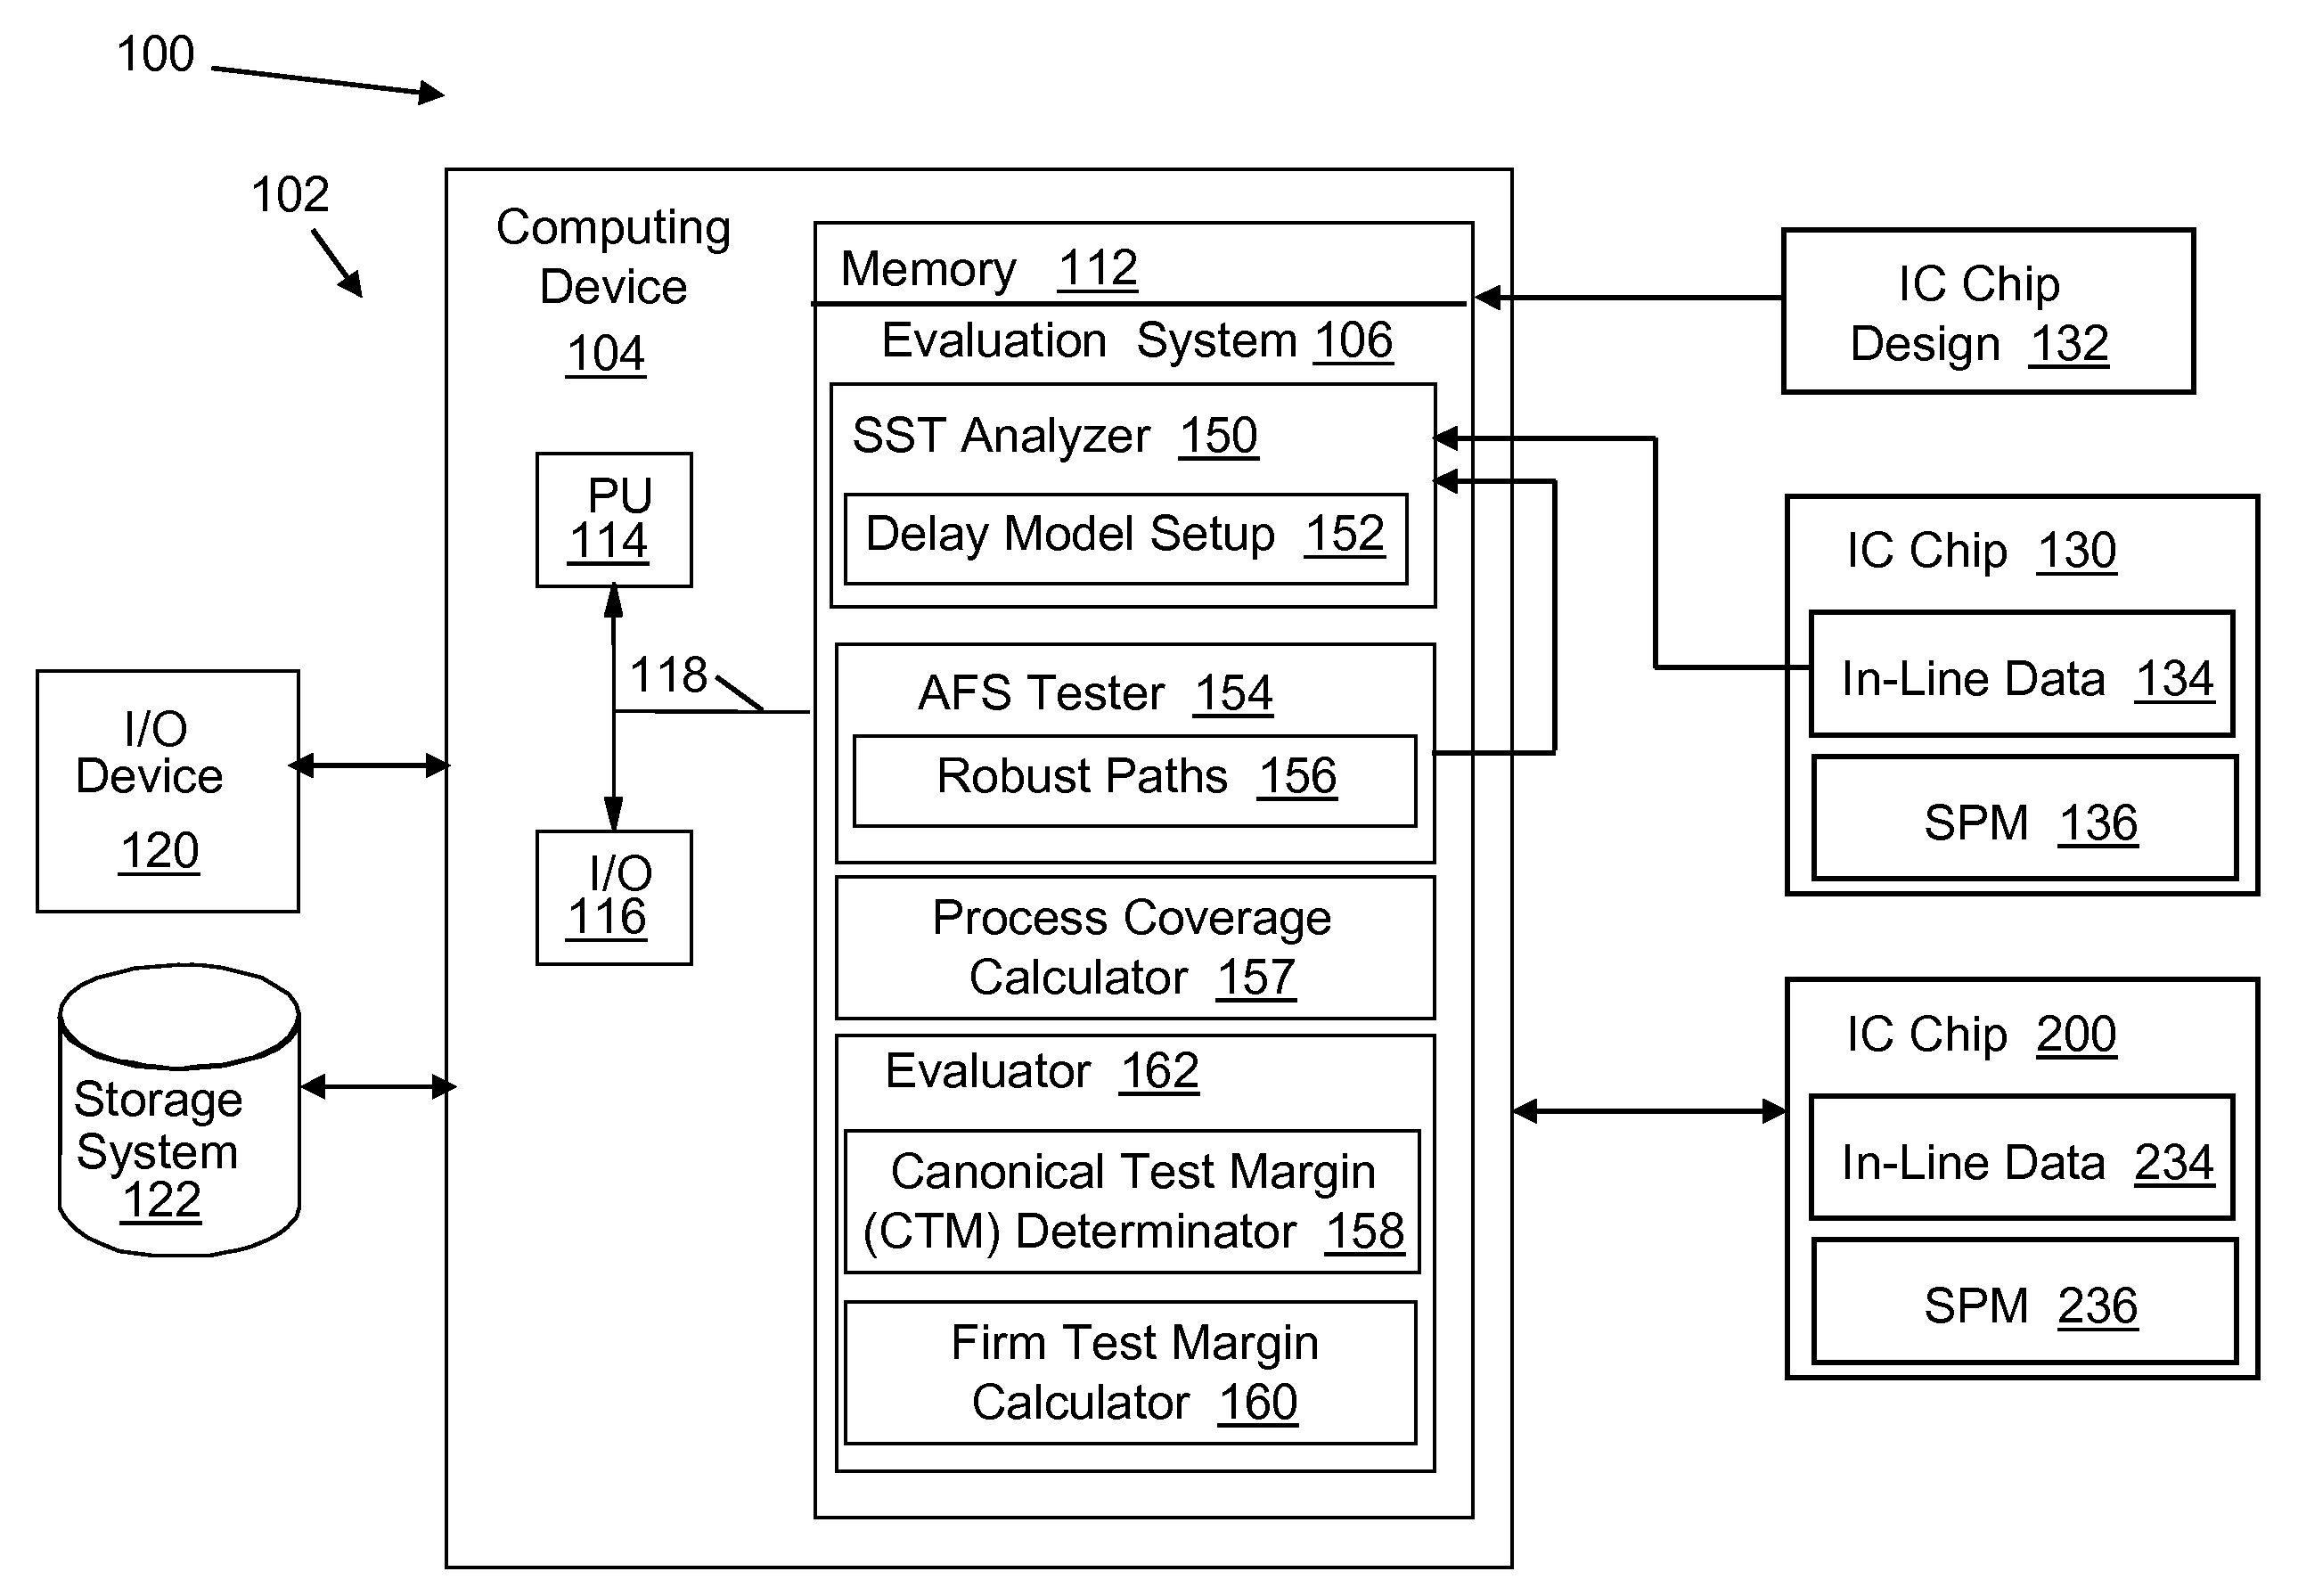 IC chip at-functional-speed testing with process coverage evaluation